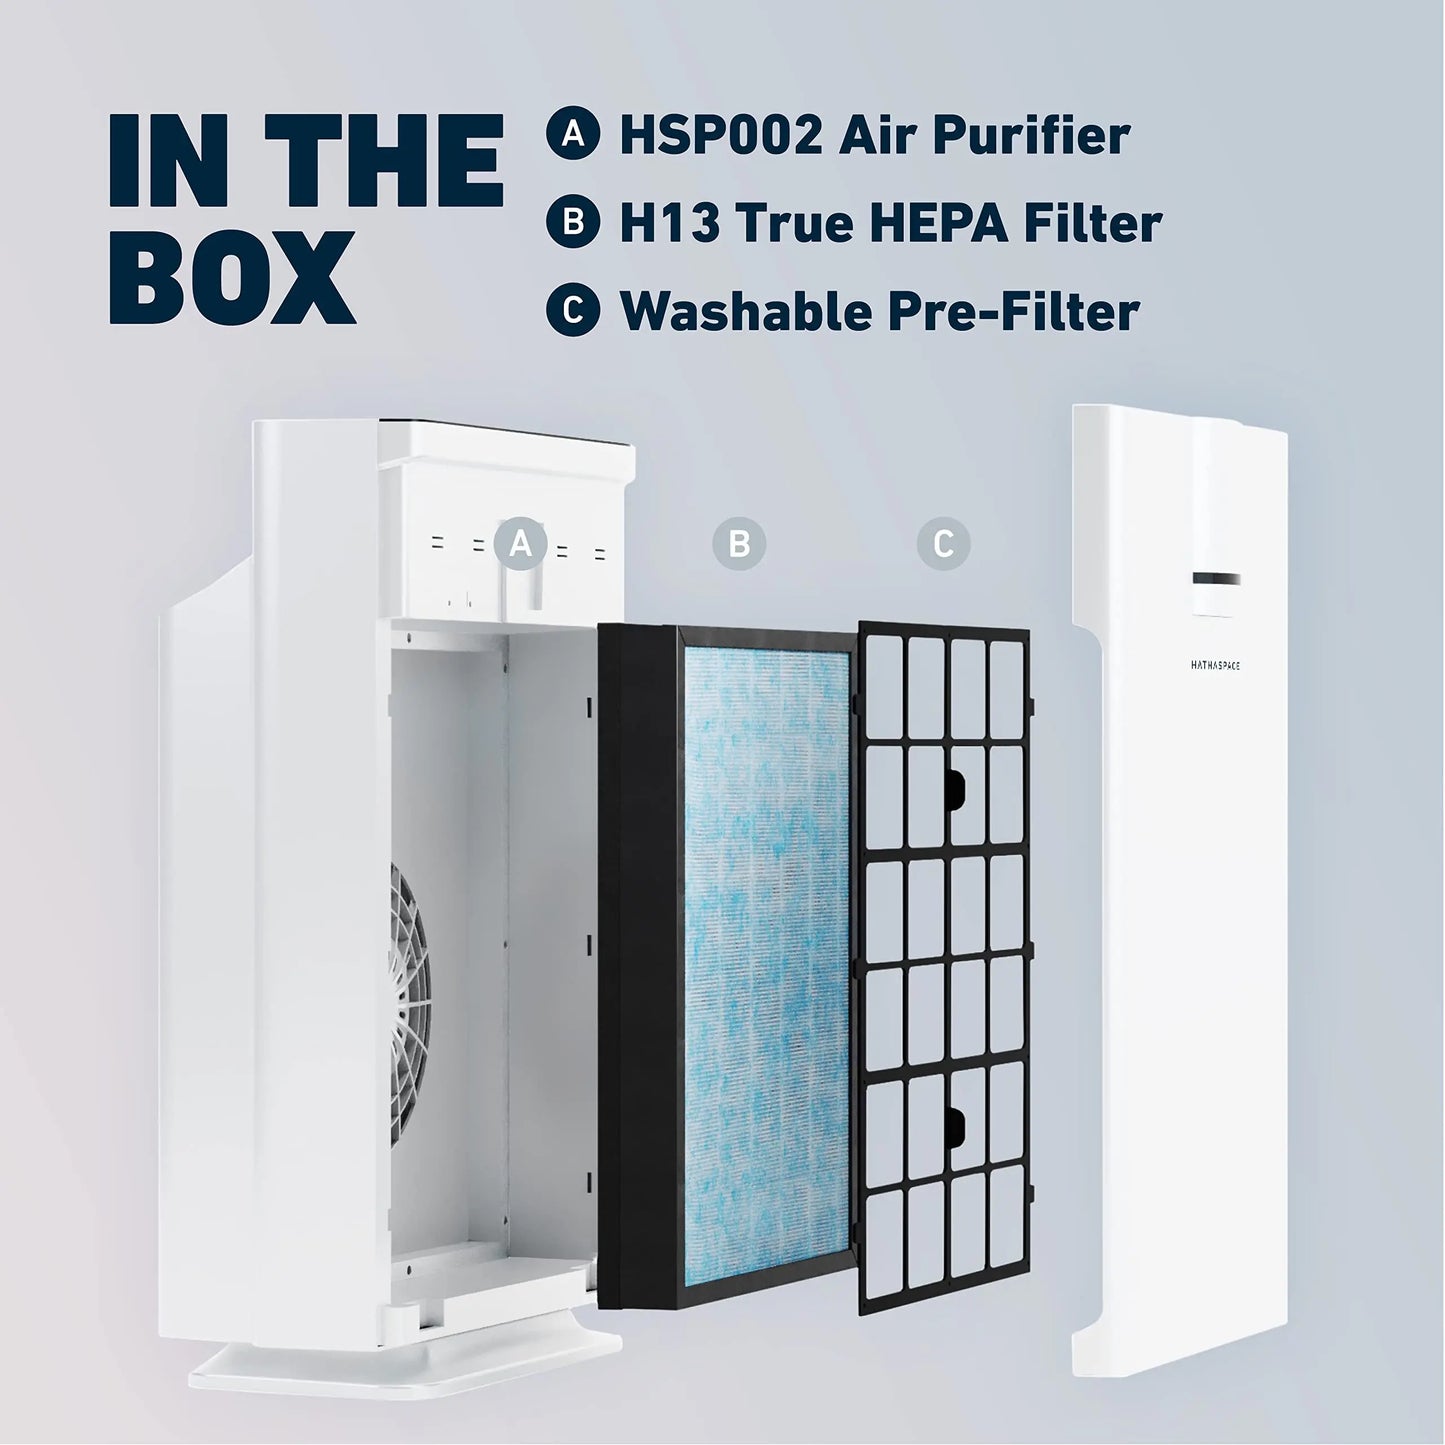 Smart Air Purifiers, Large Rooms - HSP002 - True HEPA Air Purifier, Cleaner & Filter for Allergies, Smoke